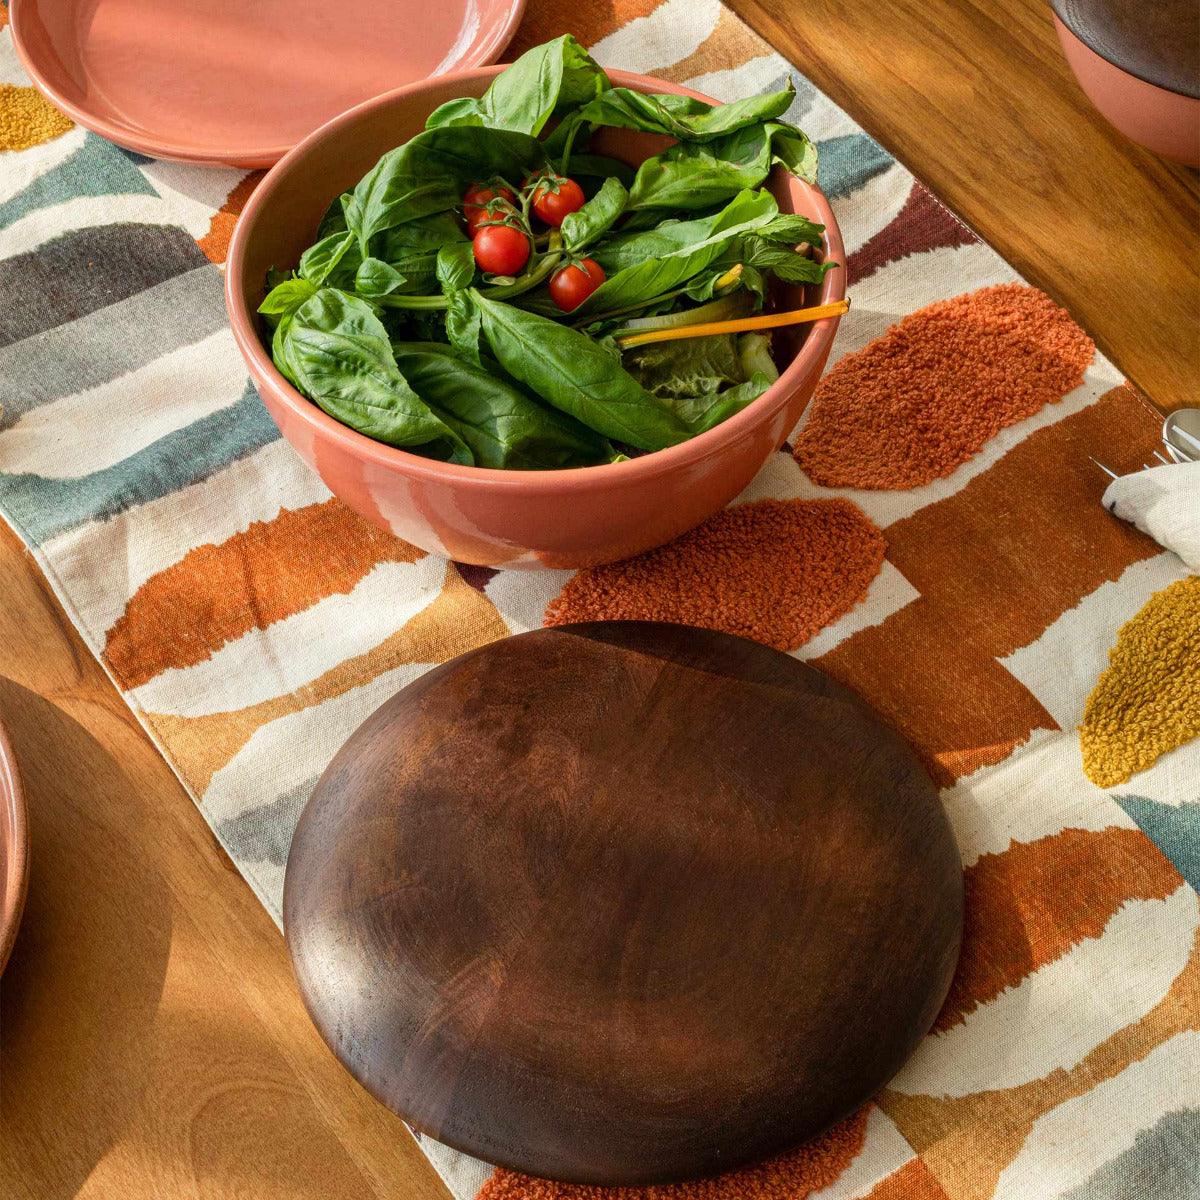 Rustic Reef Ceramic Serving Bowl With Wooden Lid